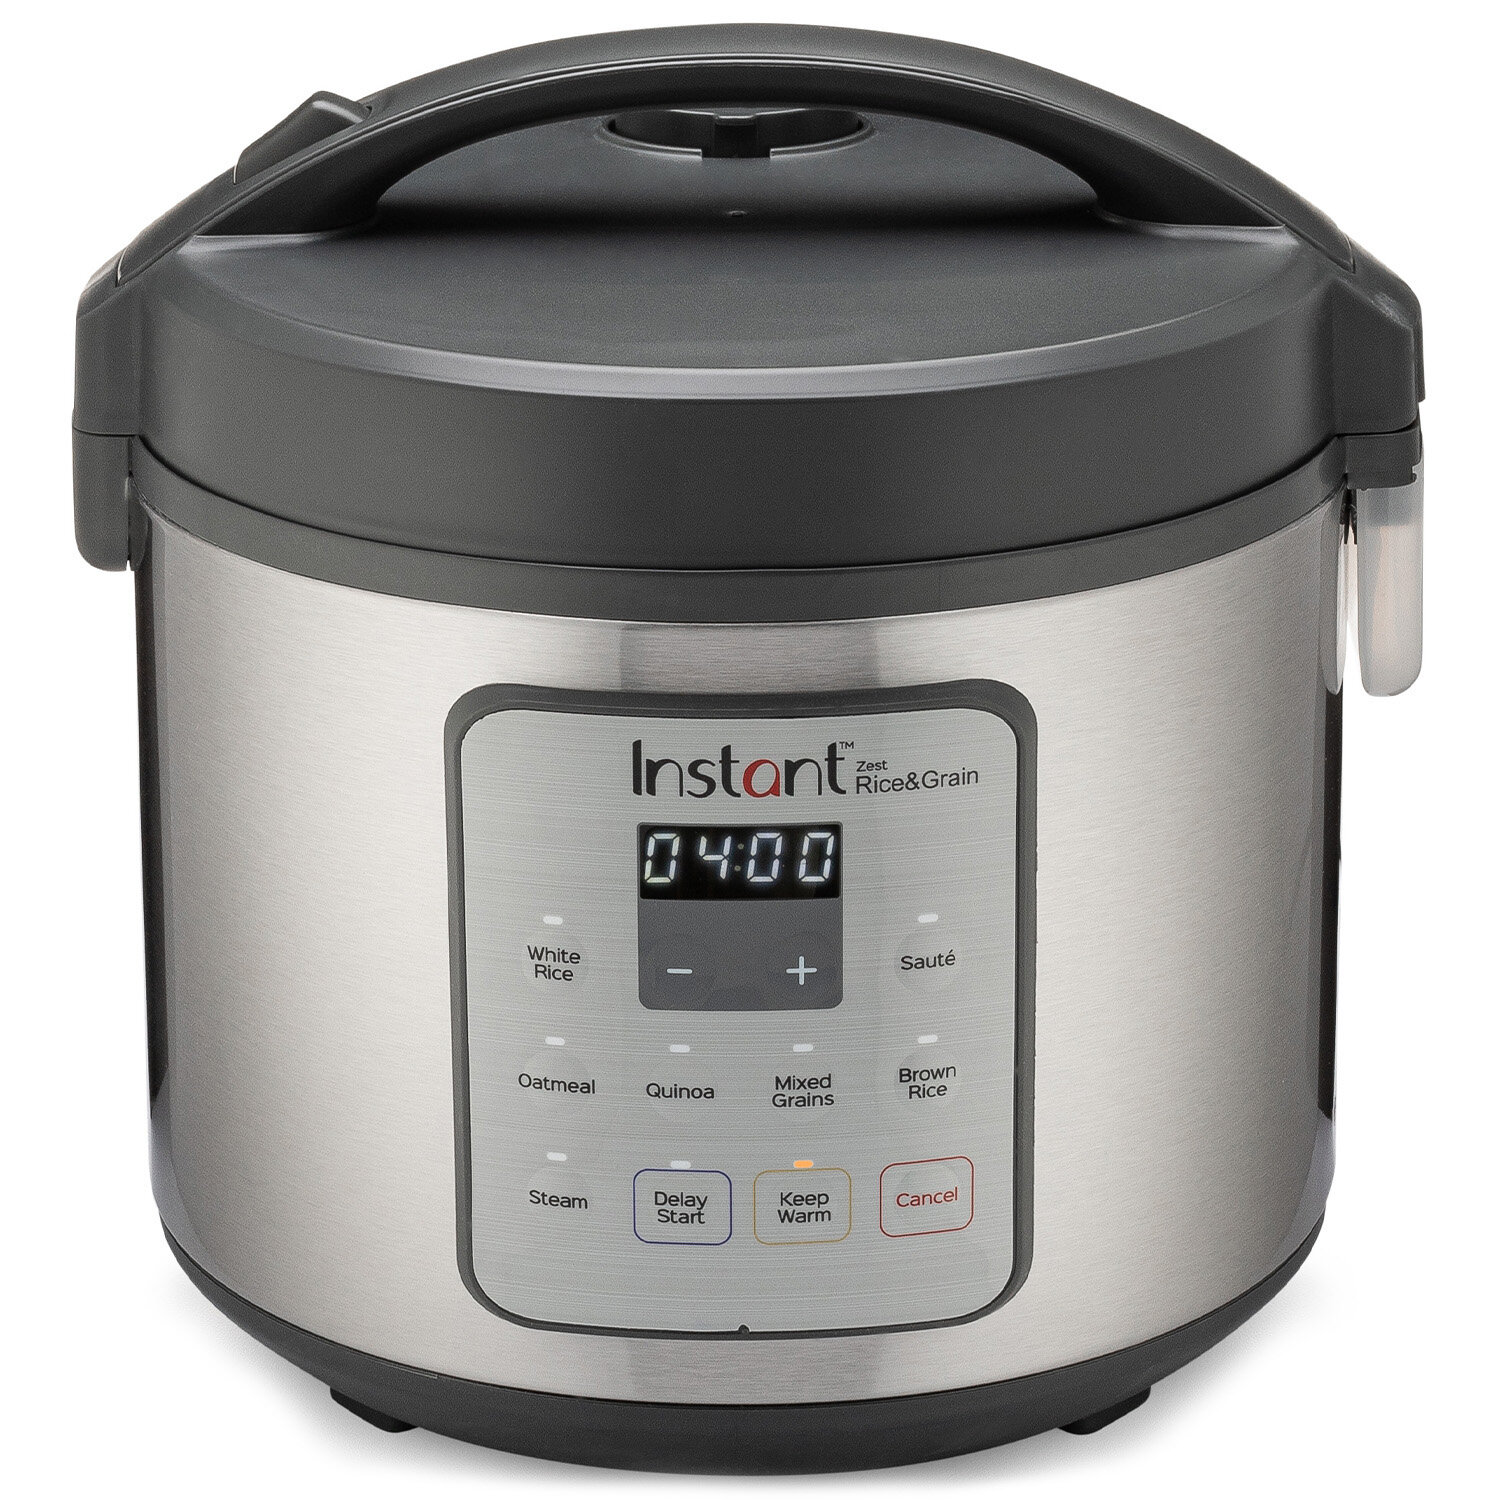 Aroma 20-Cup (Cooked) / 5qt. Cool-Touch Digital Rice & Grain Multicooker & Slow Cooker, Steam Tray Included, Black (ARC-5200SB) Aroma